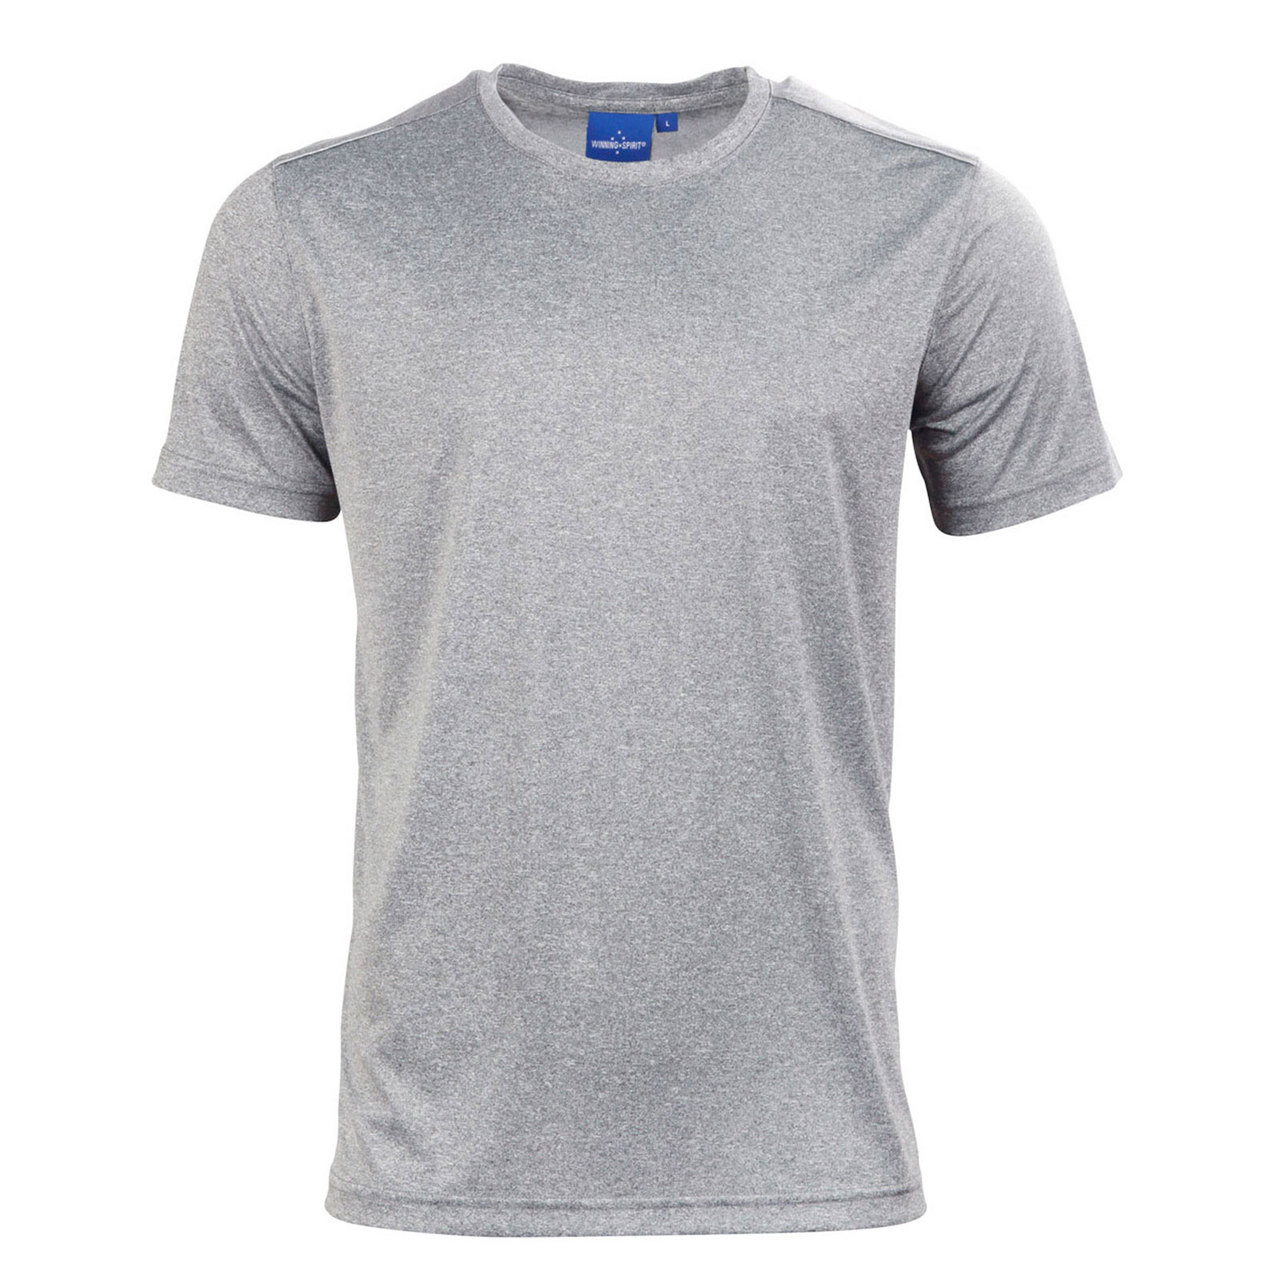 Mens Quick Dry Tshirt with Reflective Piping | Wholesale Sports ...